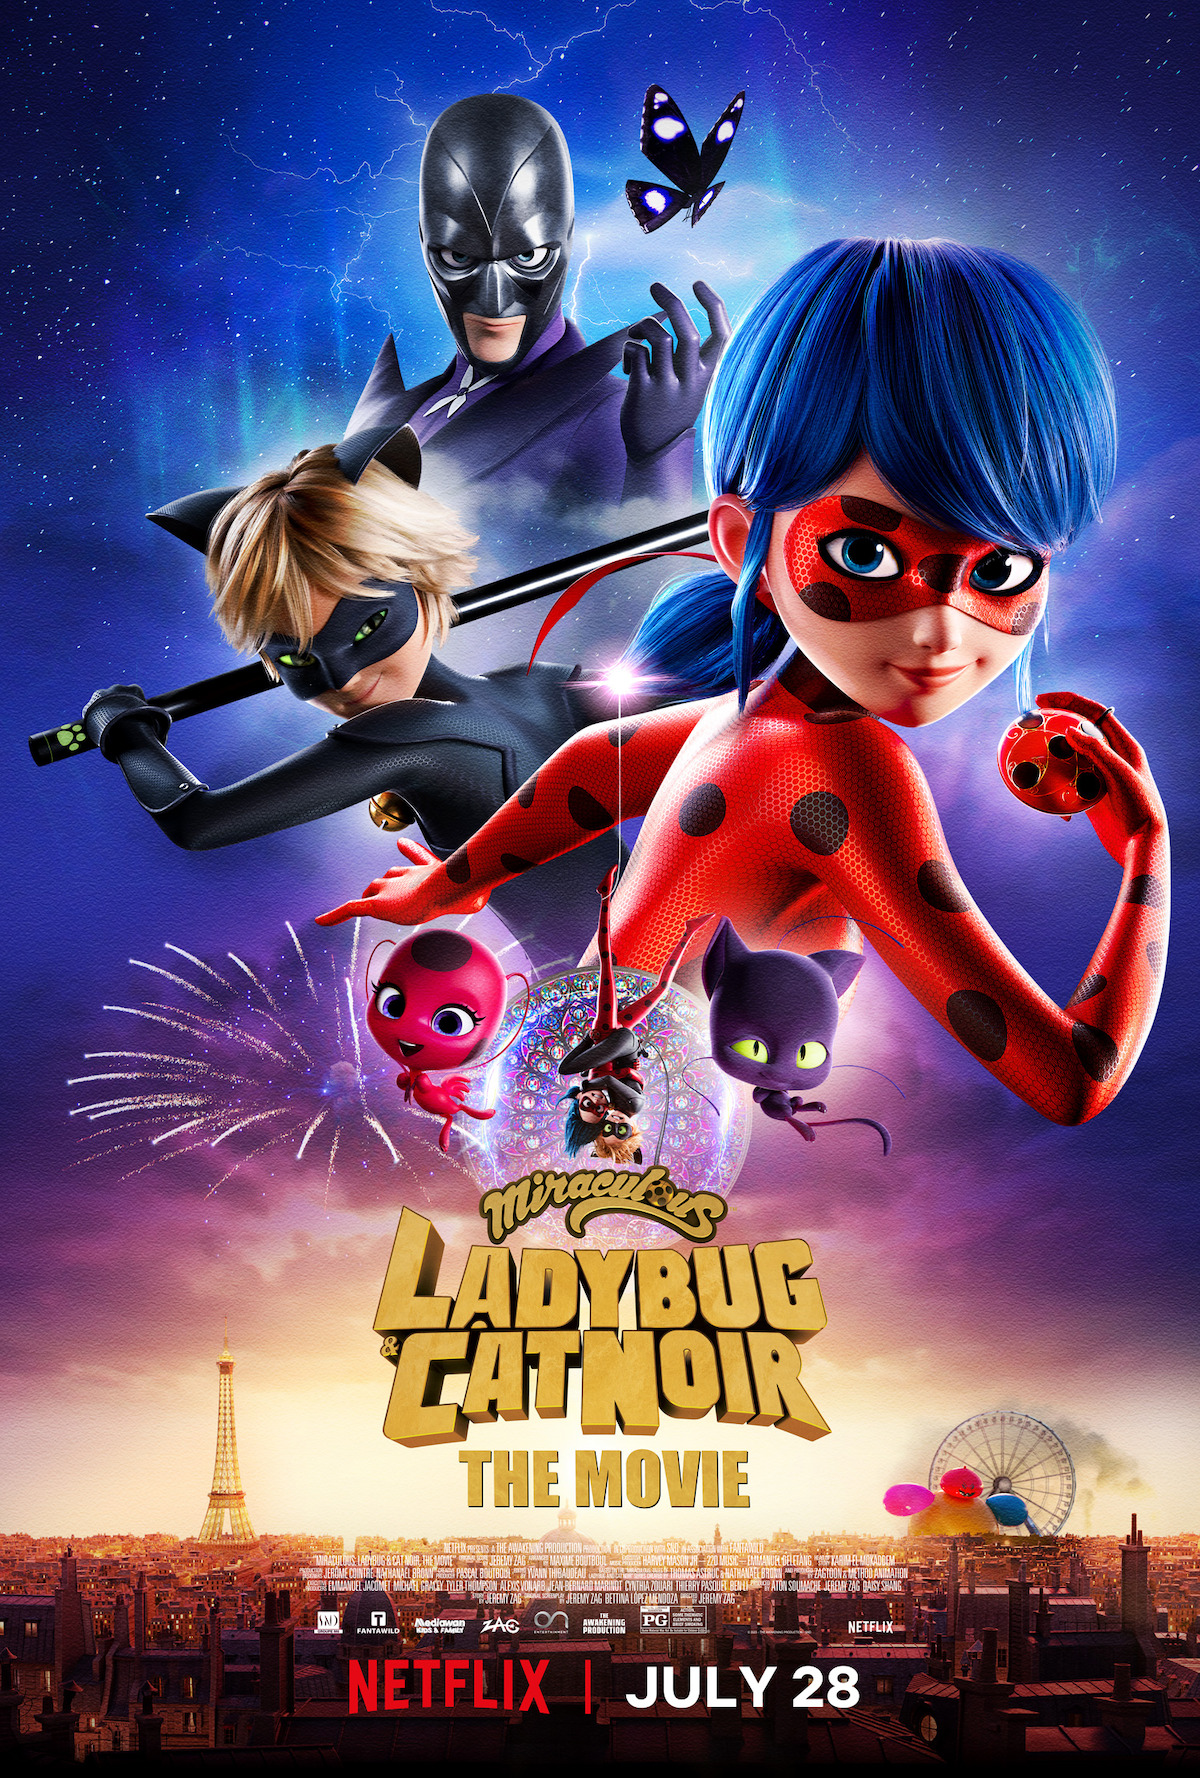 alicia shugart recommends show me a picture of miraculous ladybug pic